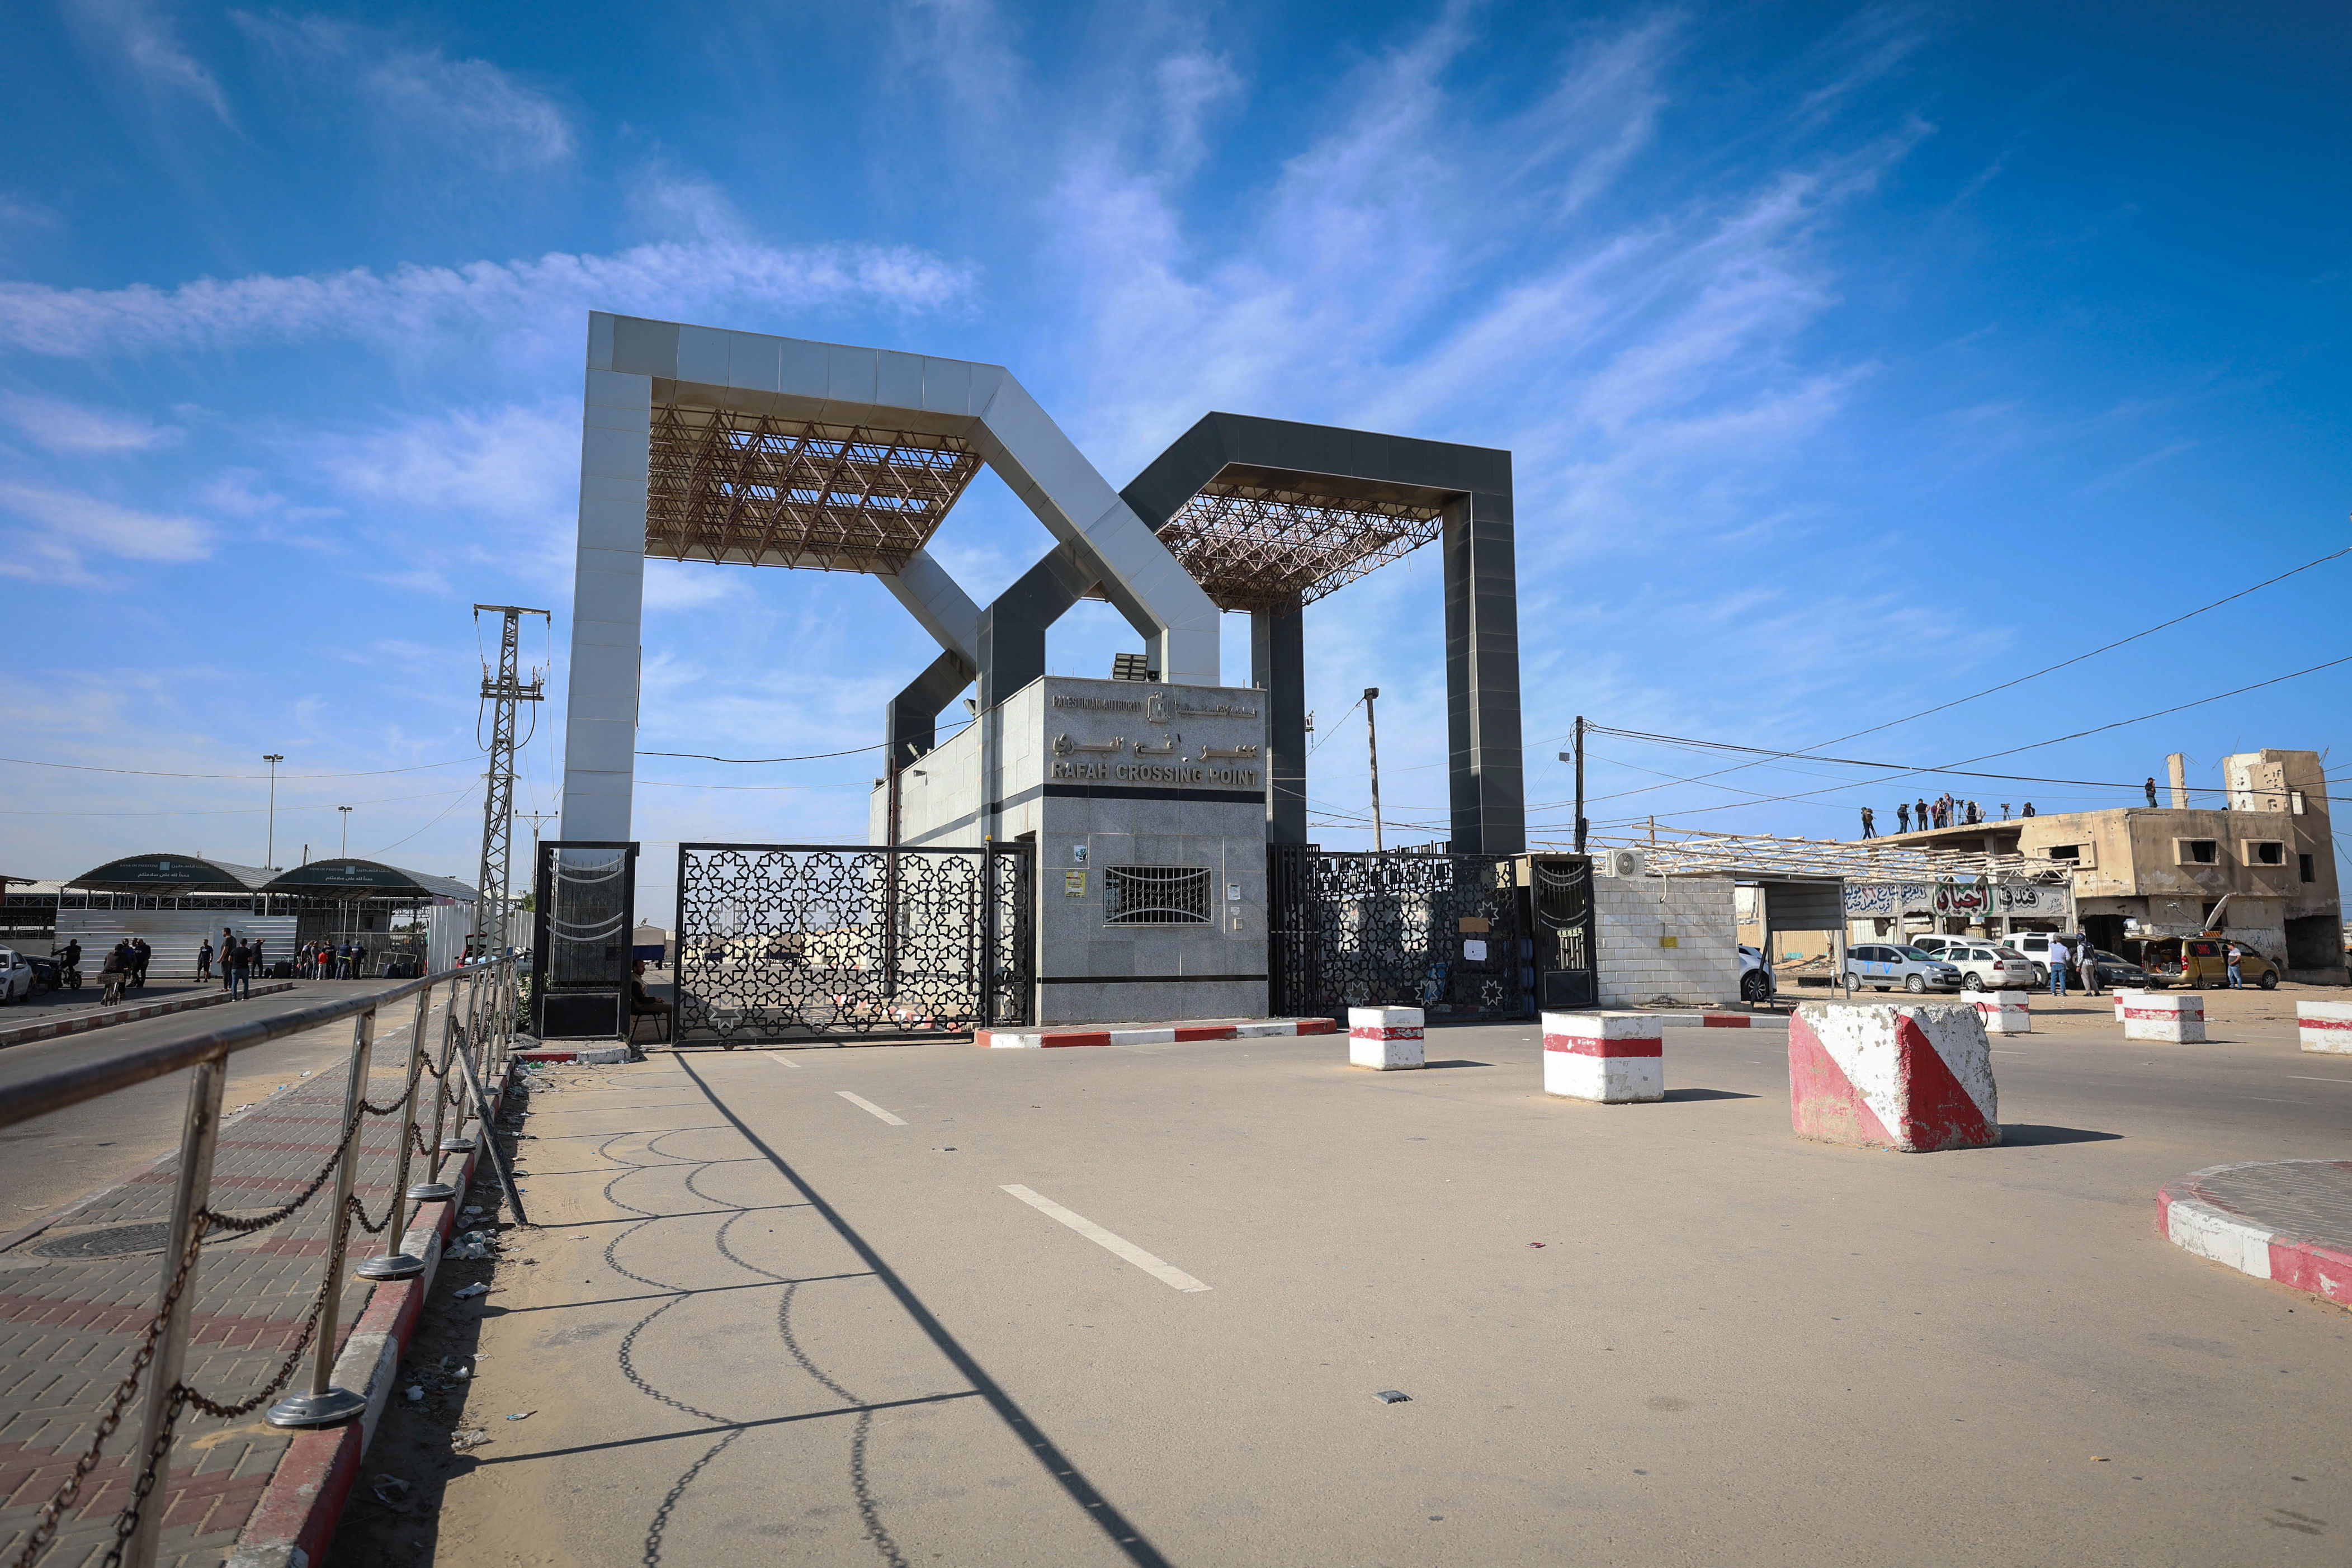 middle east conflict live updates: idf takes control of rafah crossing’s gaza side; aid flow halted, border official says